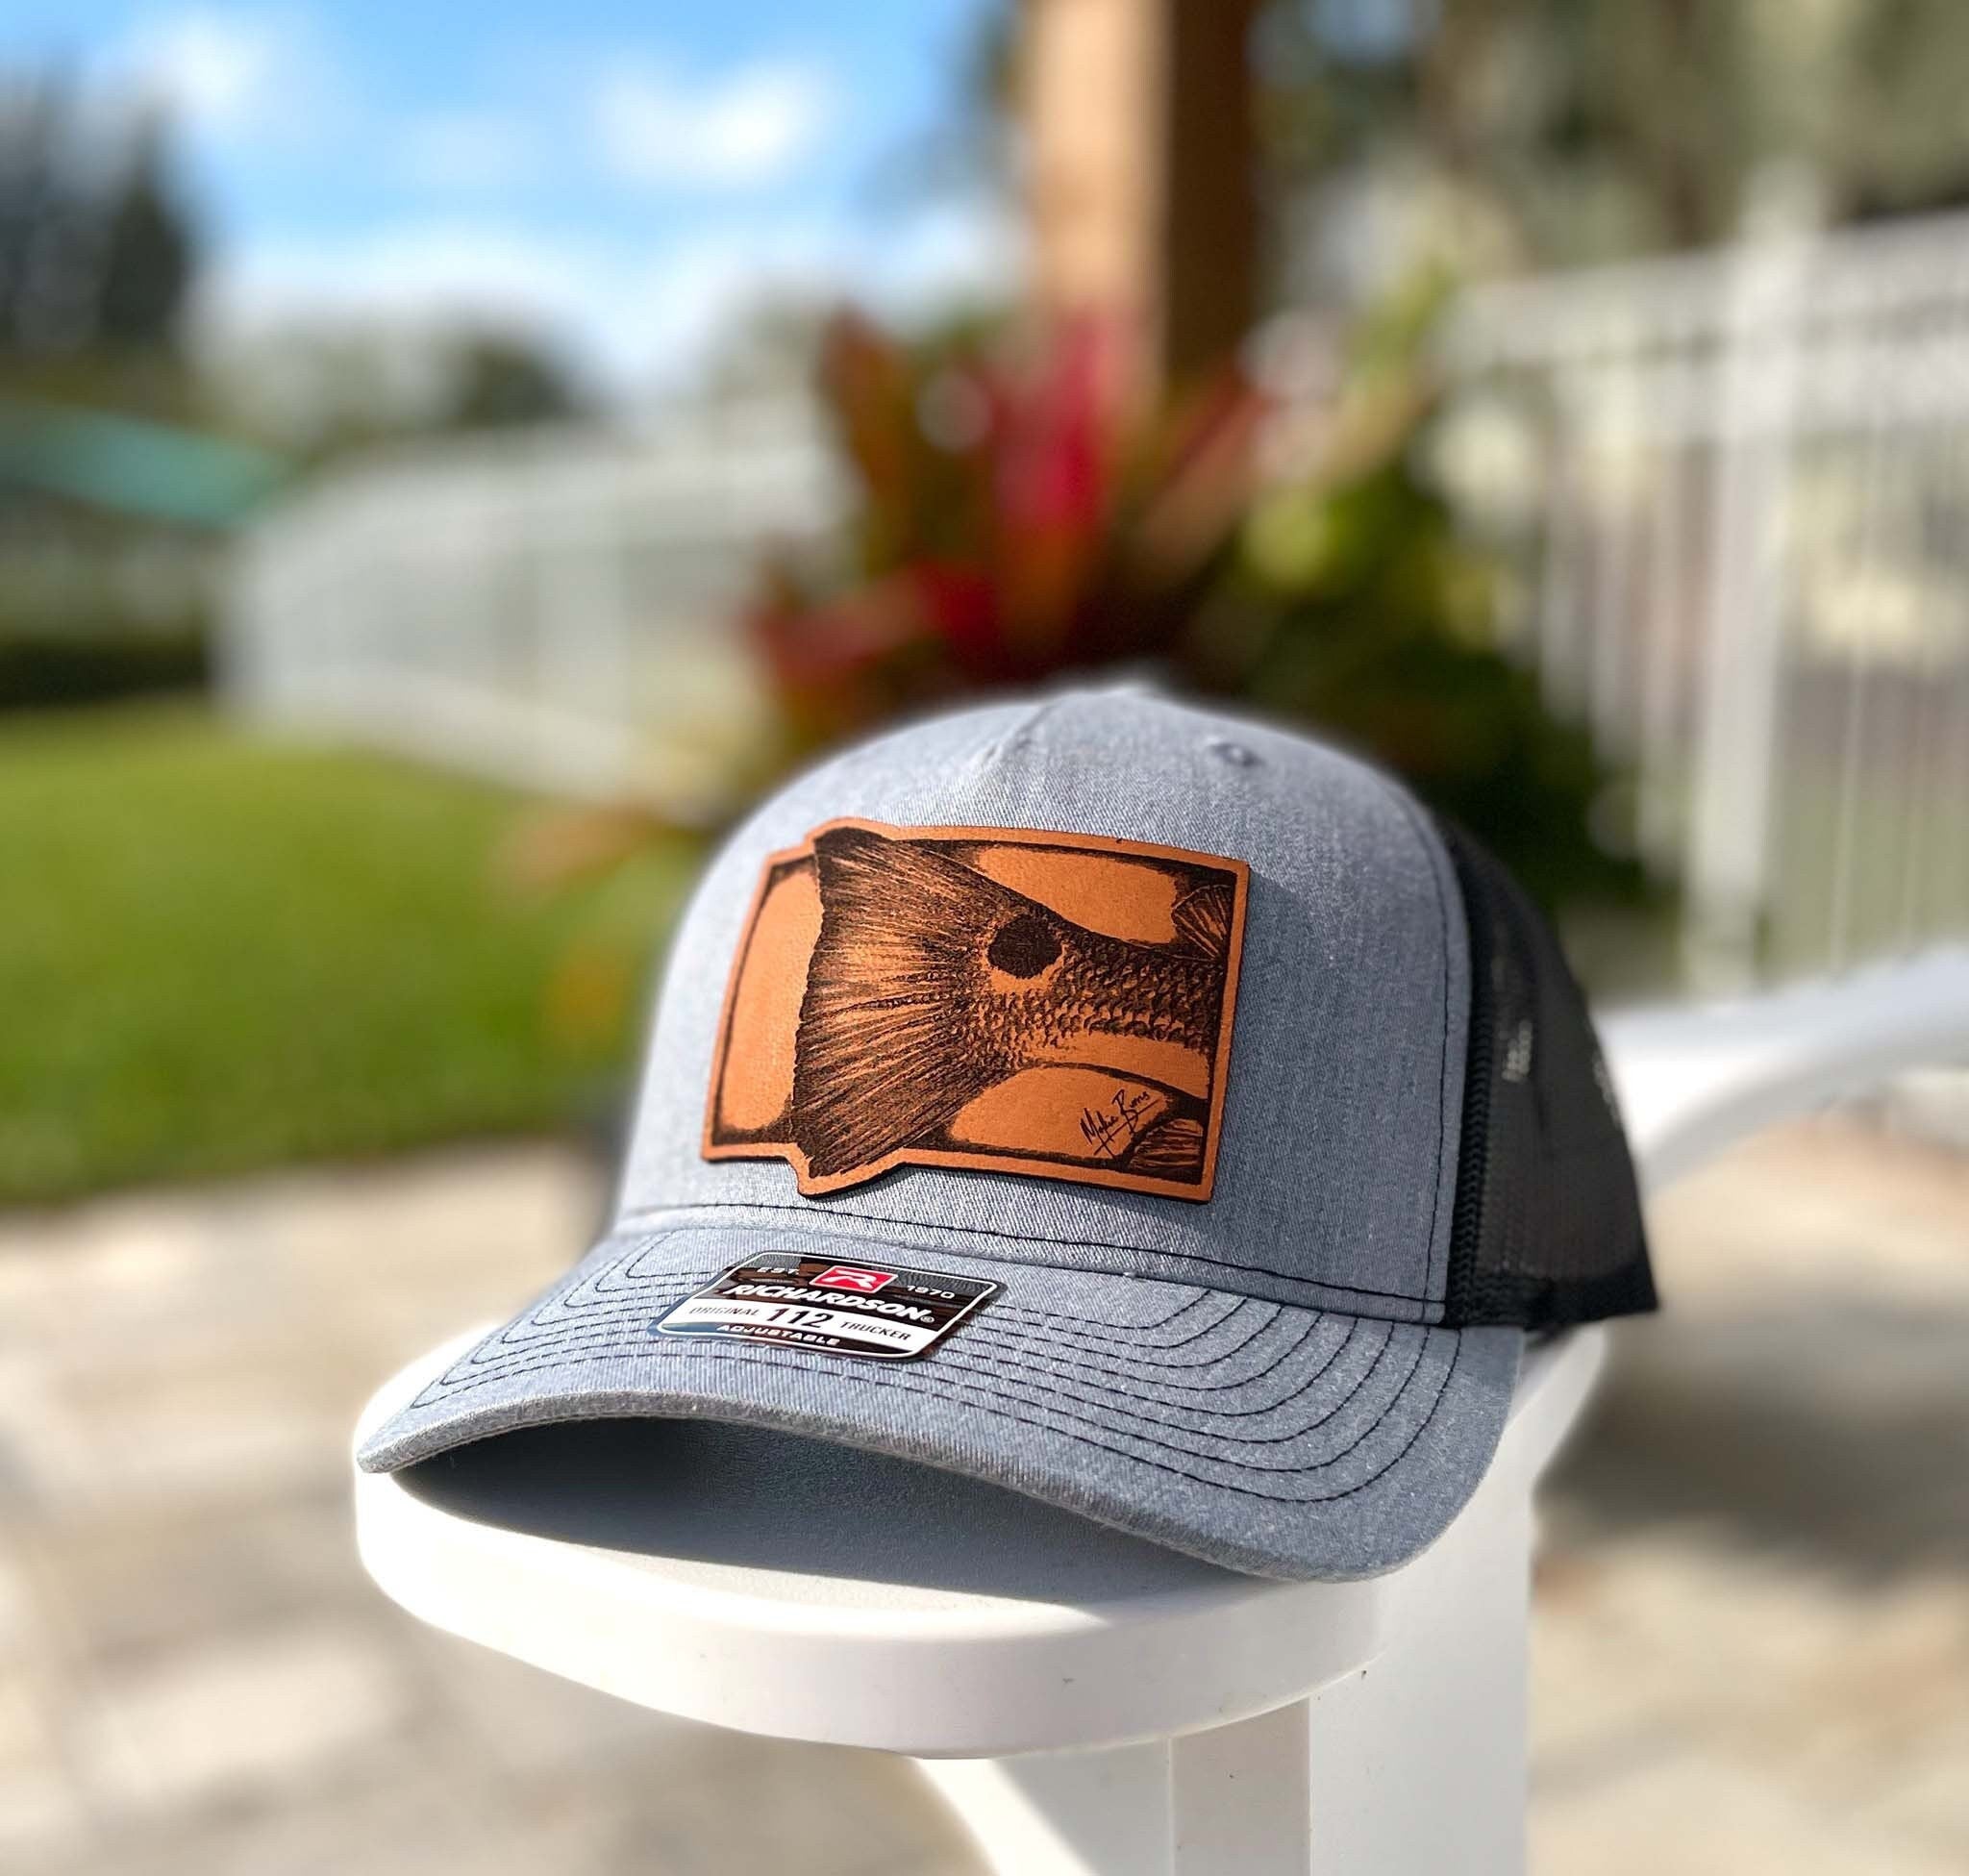 Redfish Trucker Hat - Leather Patch, Inshore Fishing Gifts for Men, Unique Fishing Patch Hat Gift for Dad, Ladies Fishing, Mokie Burns Hats